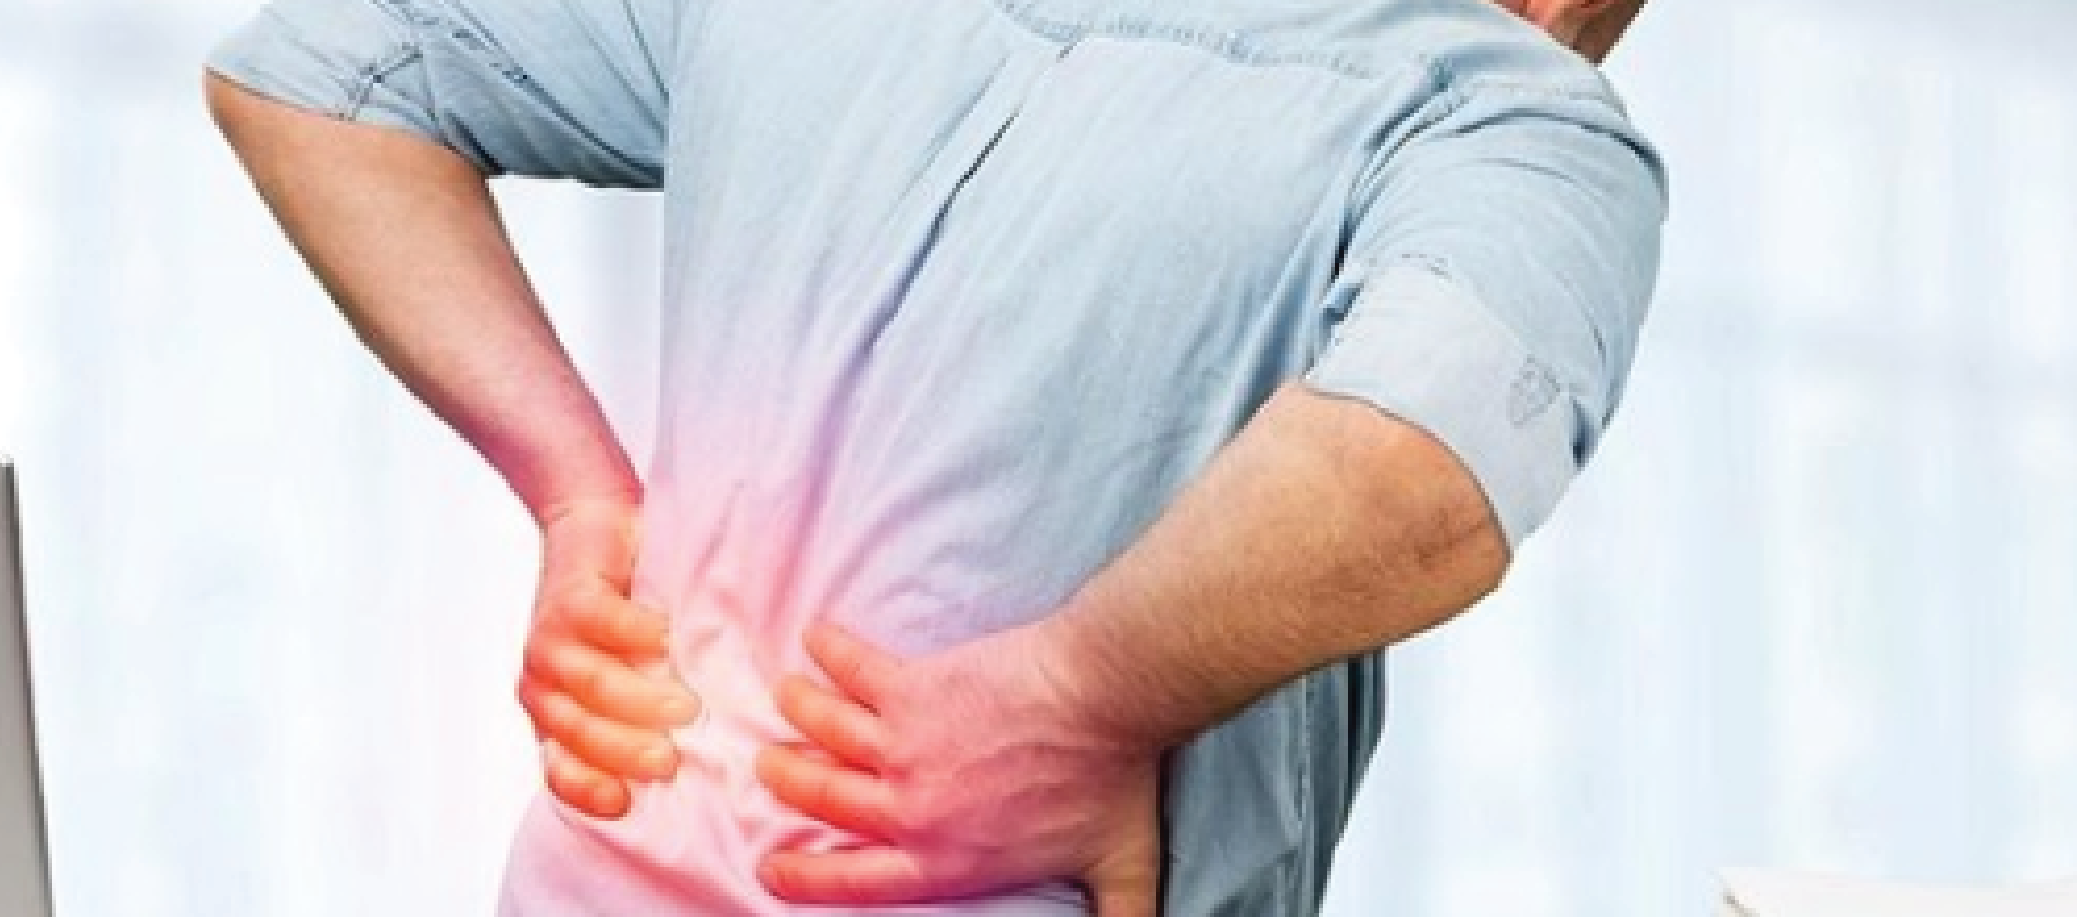 Ouch, my back!While back pain can happen to anyone at any time, here are the main causes of back pain, as well as steps you can take to find relief!How Common Is Back Pain?According to the American Chiropractic Association, around 80% of people living in the United States will experience back pain at some point